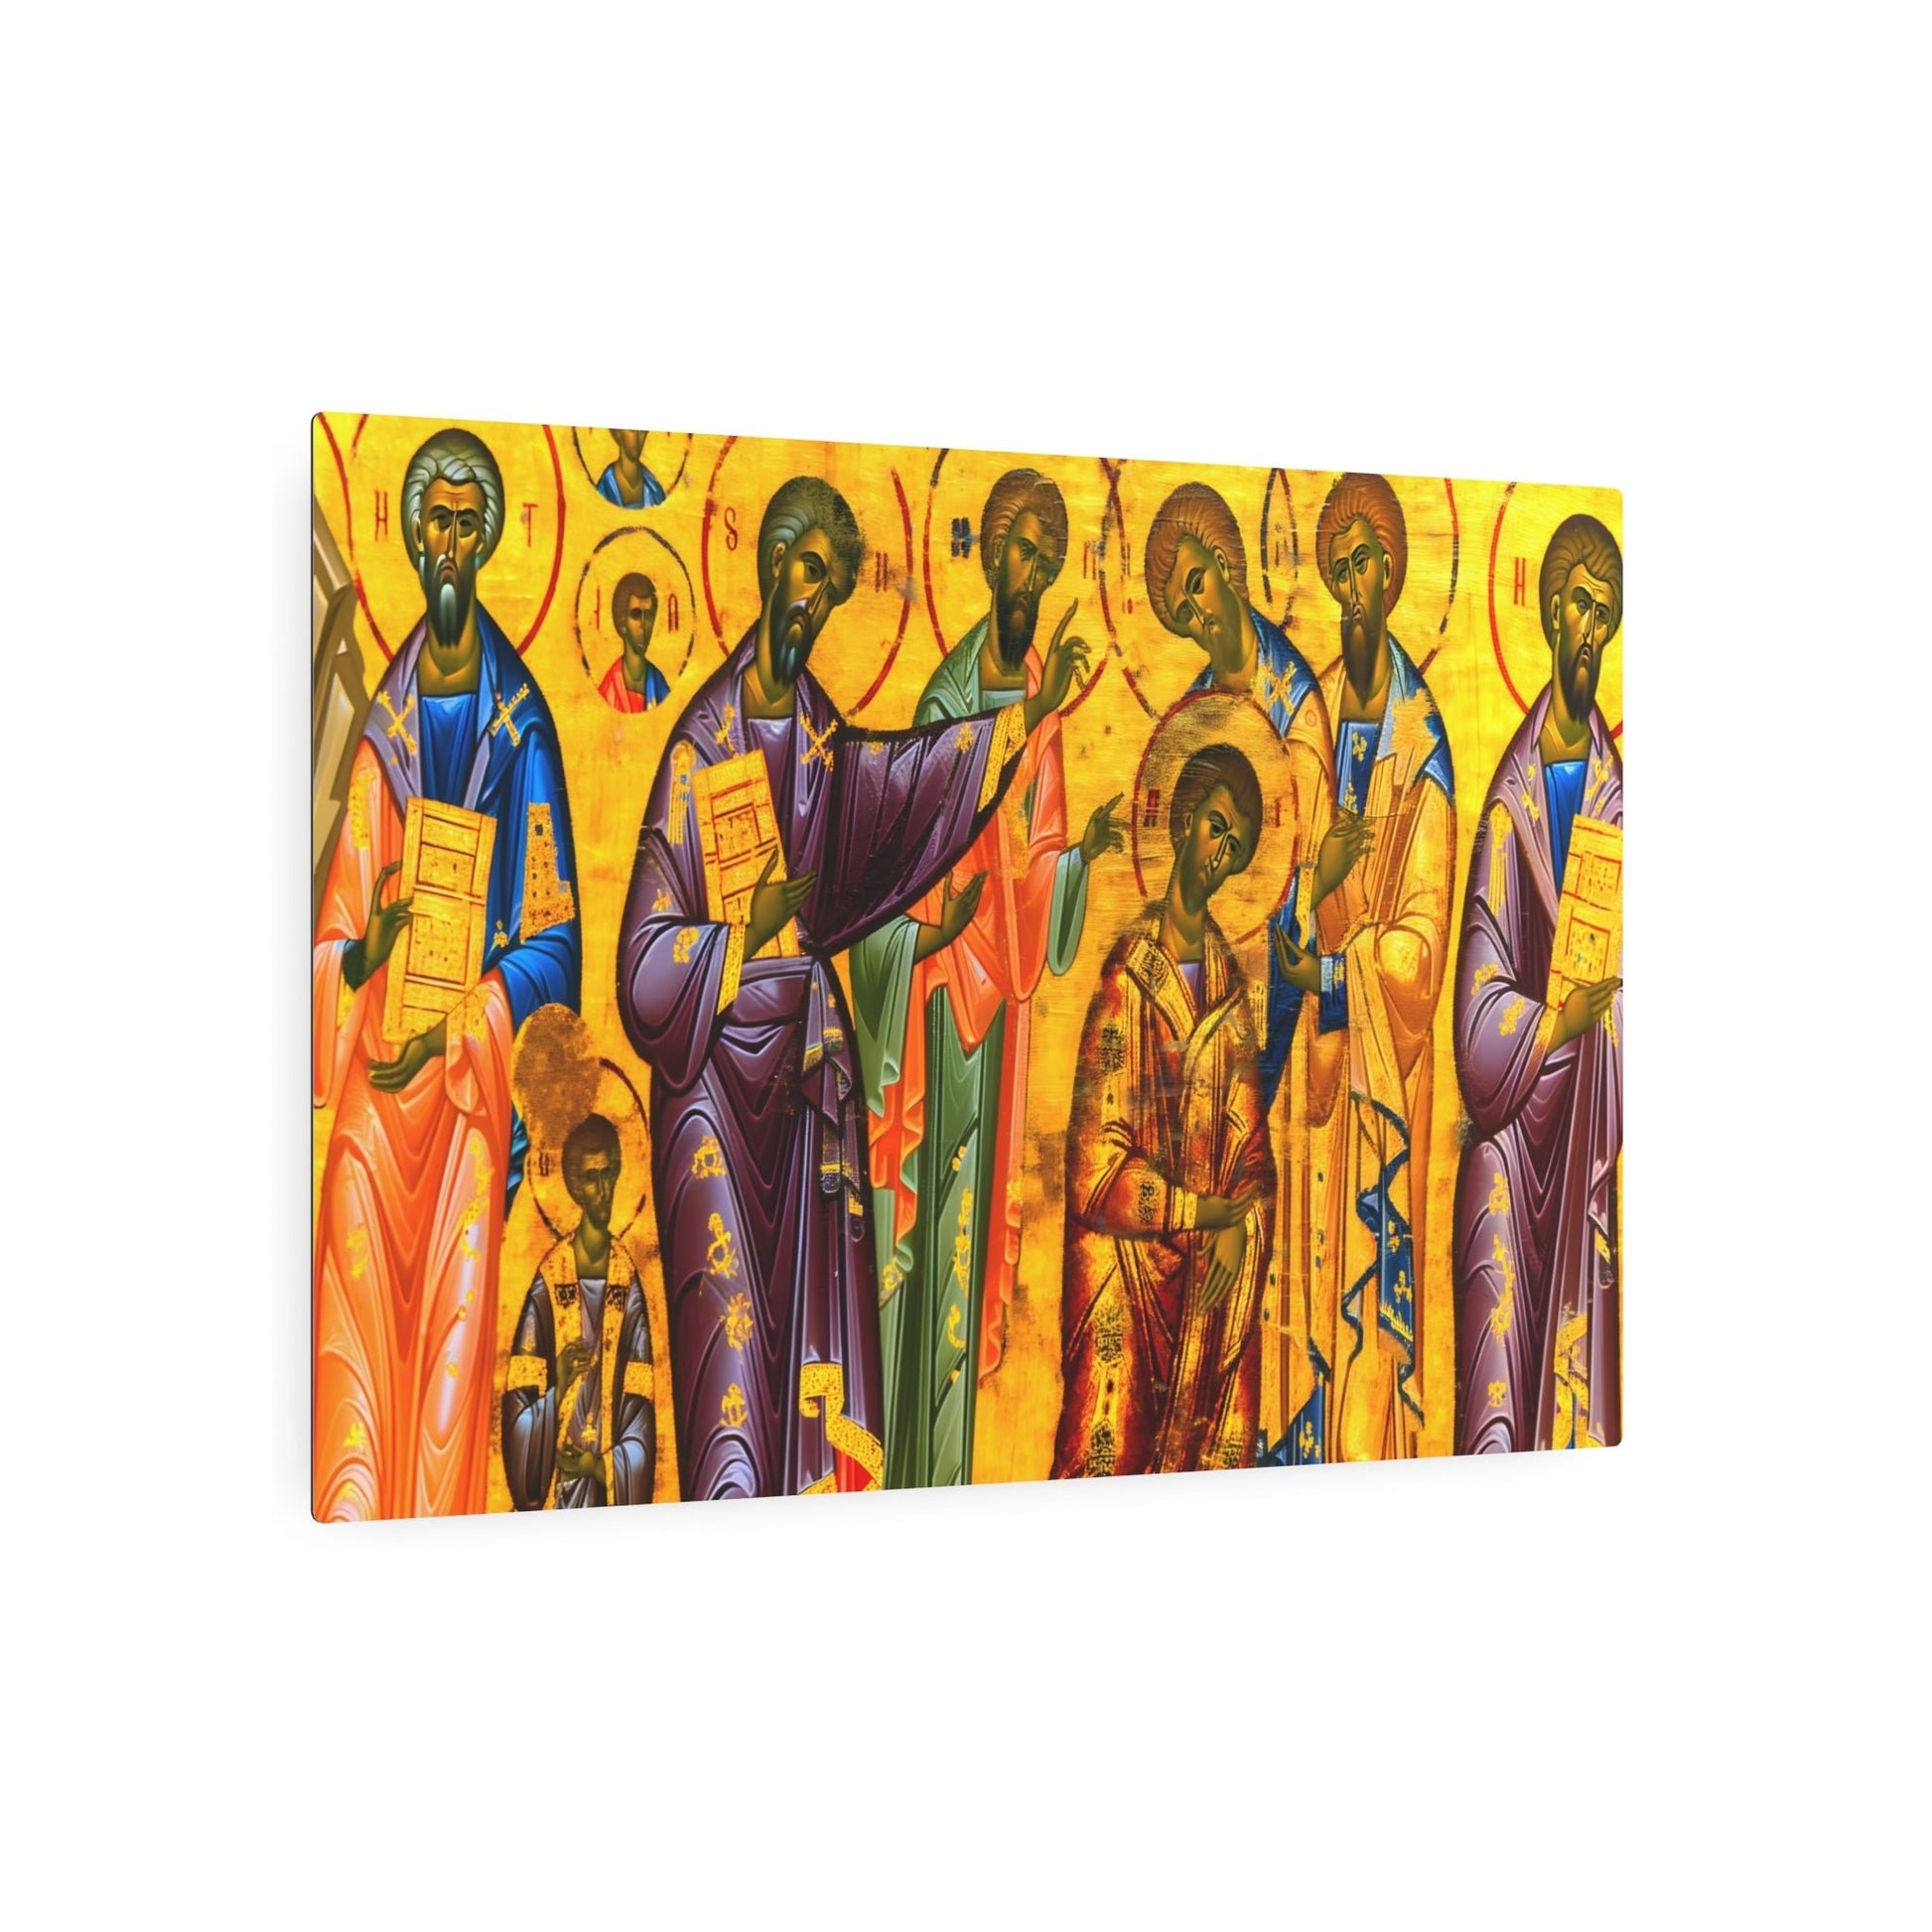 Metal Poster Art | "Gold-Backed Byzantine Art: Detailed and Ornate Religious Masterpiece Reflecting Iconic Non-Western & Global Styles" - Metal Poster Art 36″ x 24″ (Horizontal) 0.12''